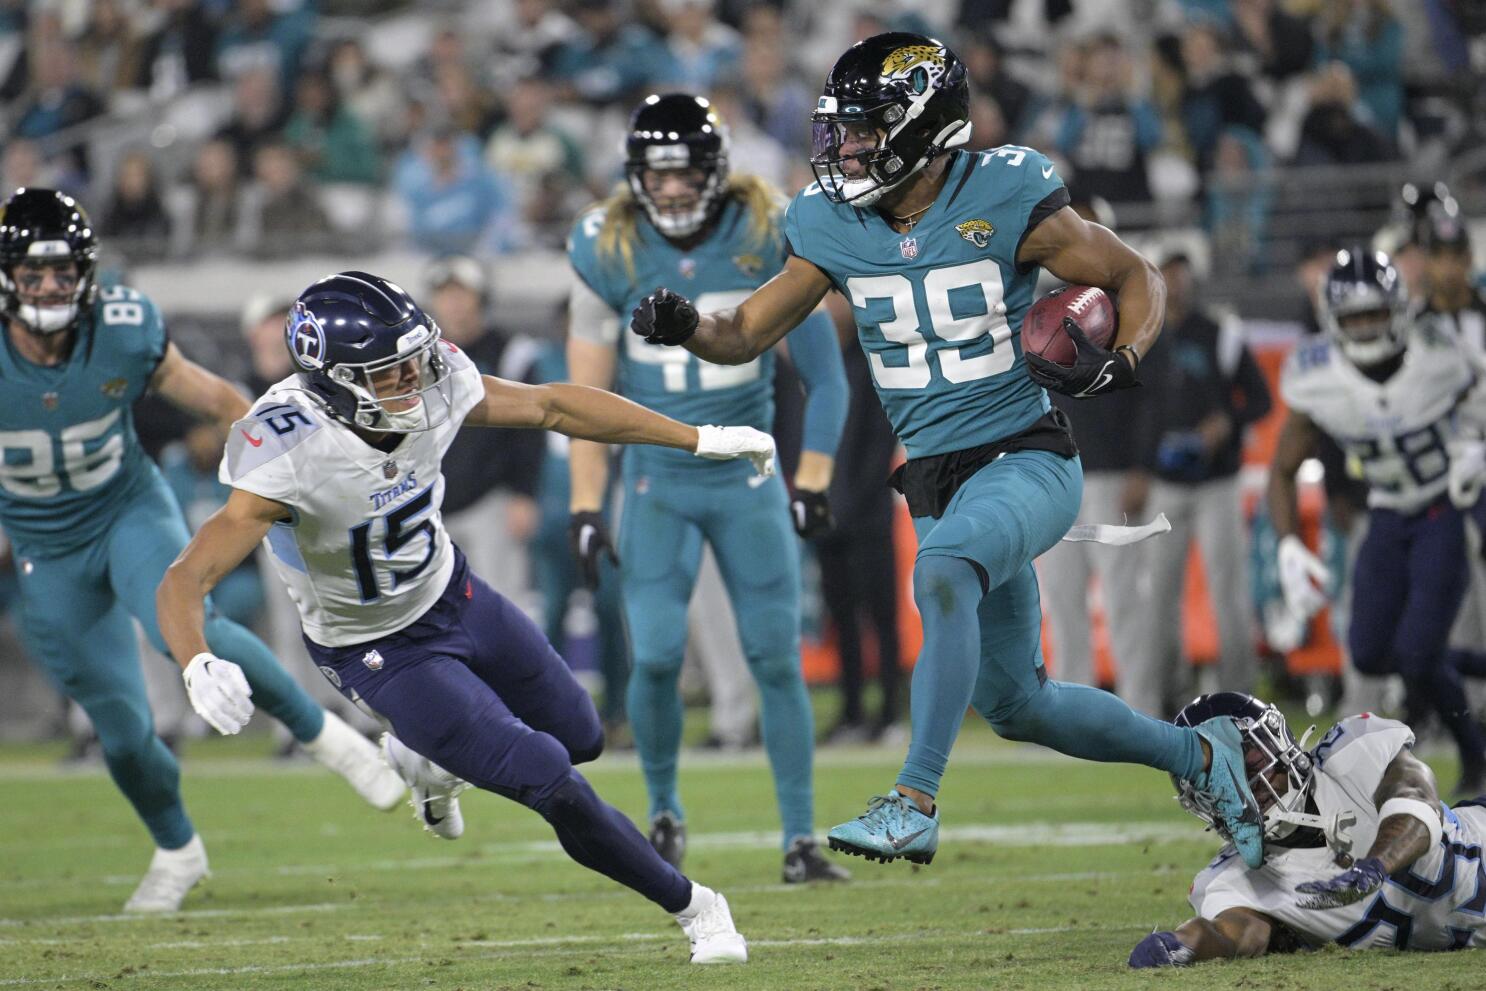 Jags returner Agnew active for wild-card game vs Chargers